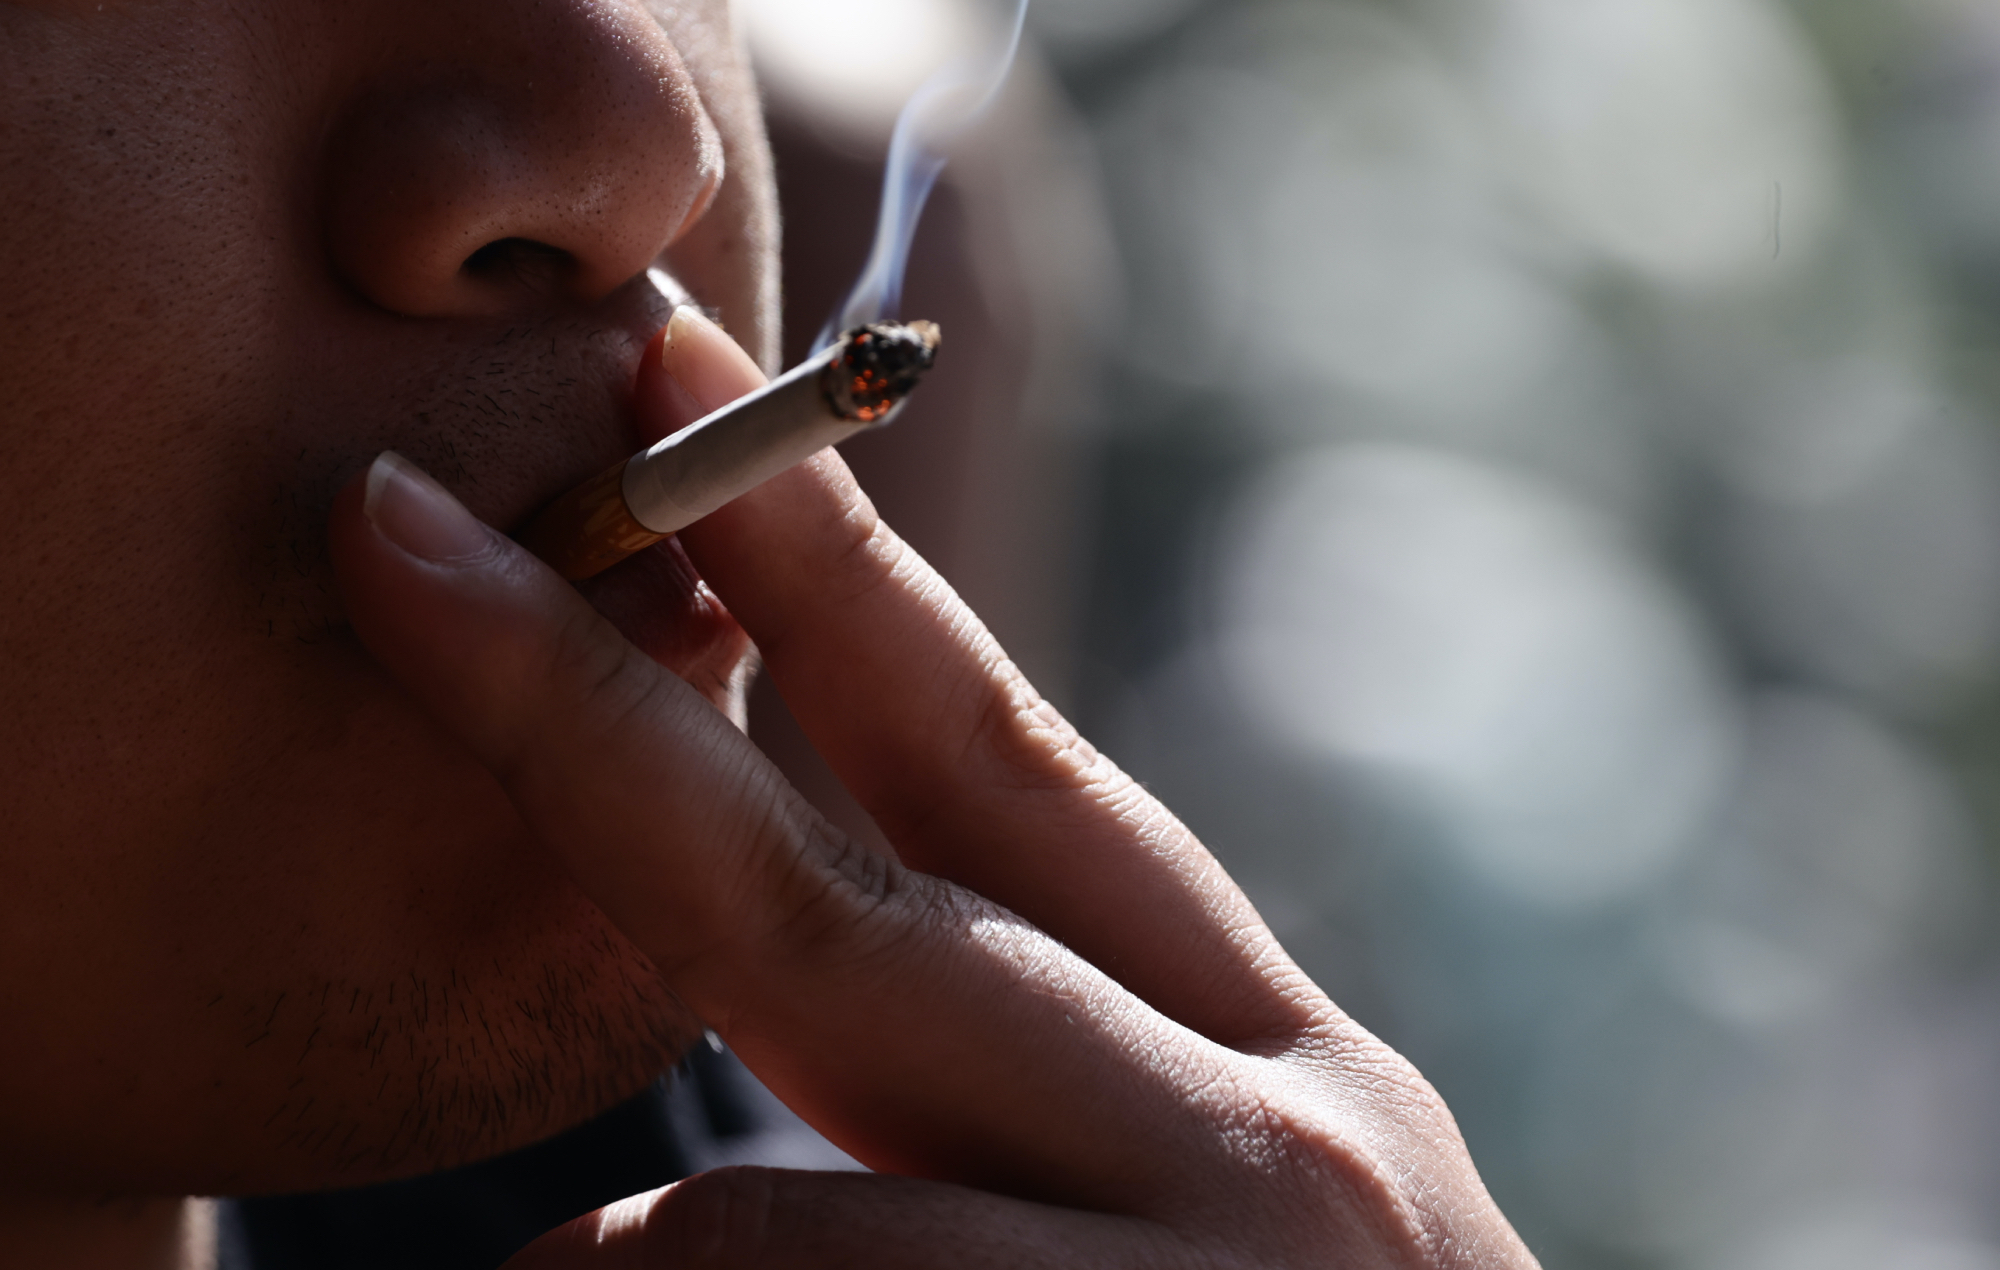 UK MPs vote for smoking ban for those born after 2009